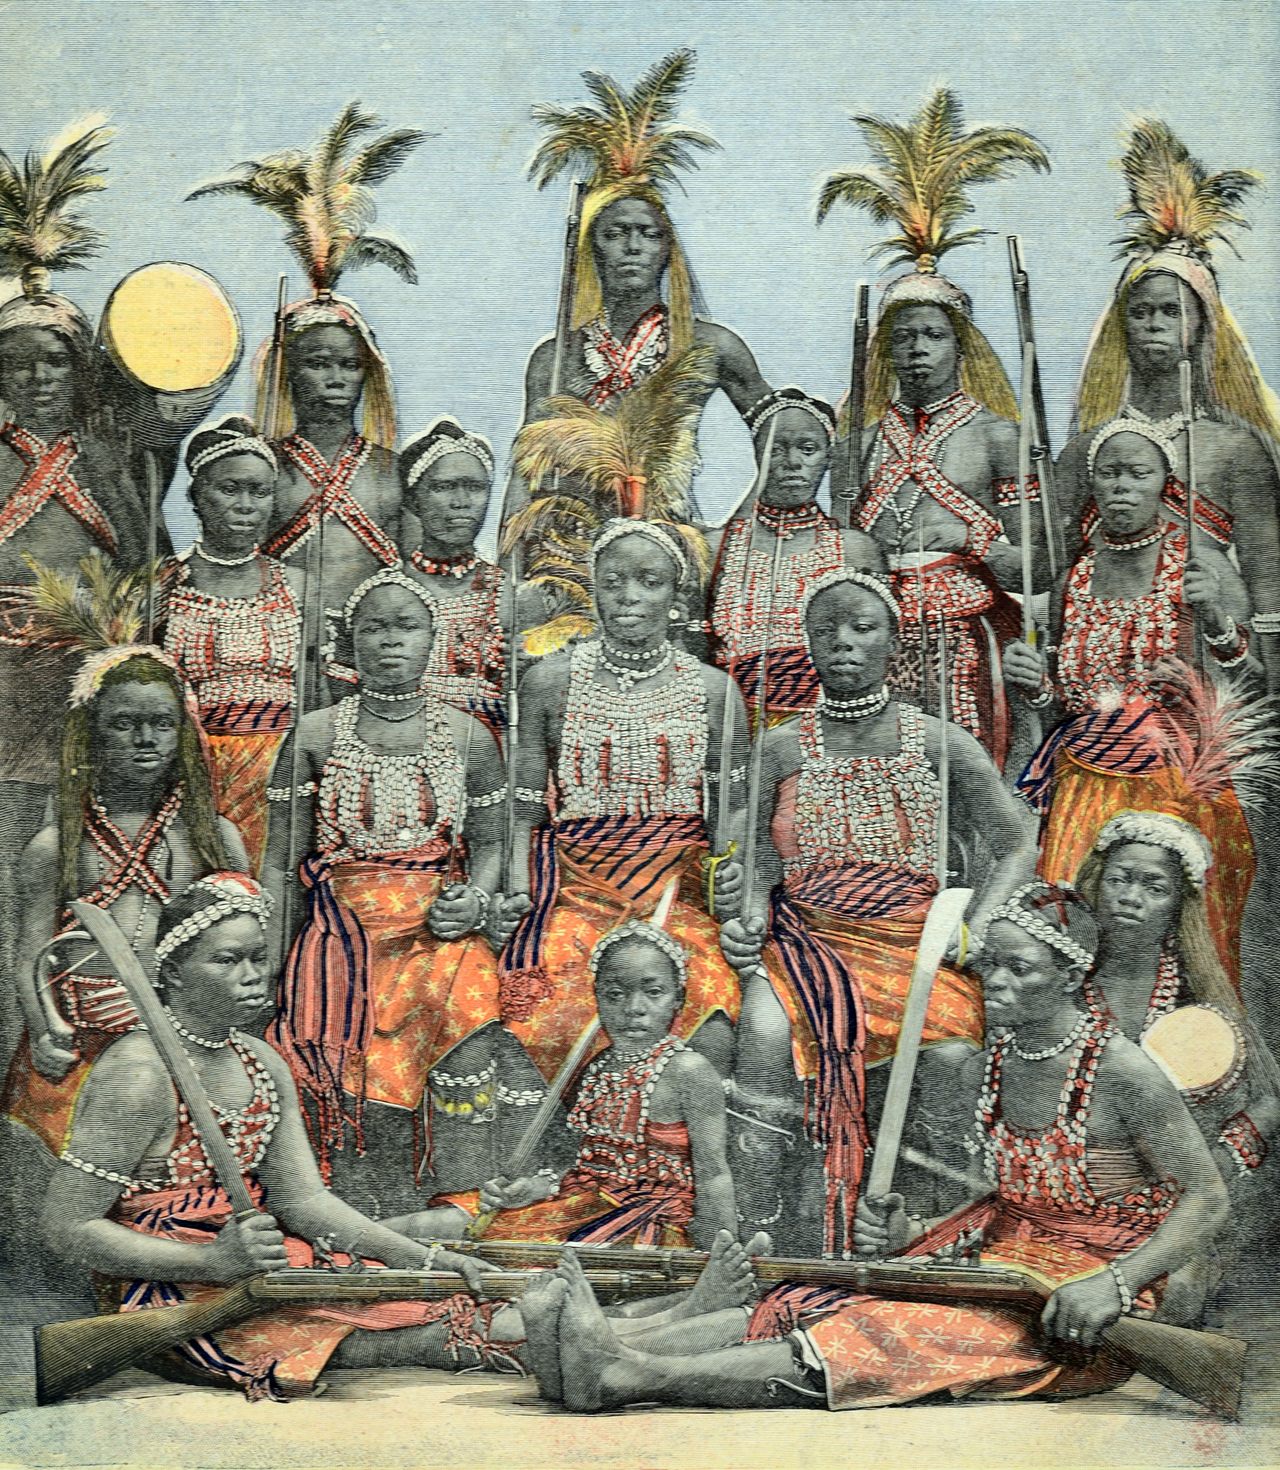 The real women warriors of the Dahomey Kingdom, photographed here in 1897, have been the subject of many fictional tales, including the upcoming film <em>The Woman King</em>, starring Viola Davis.